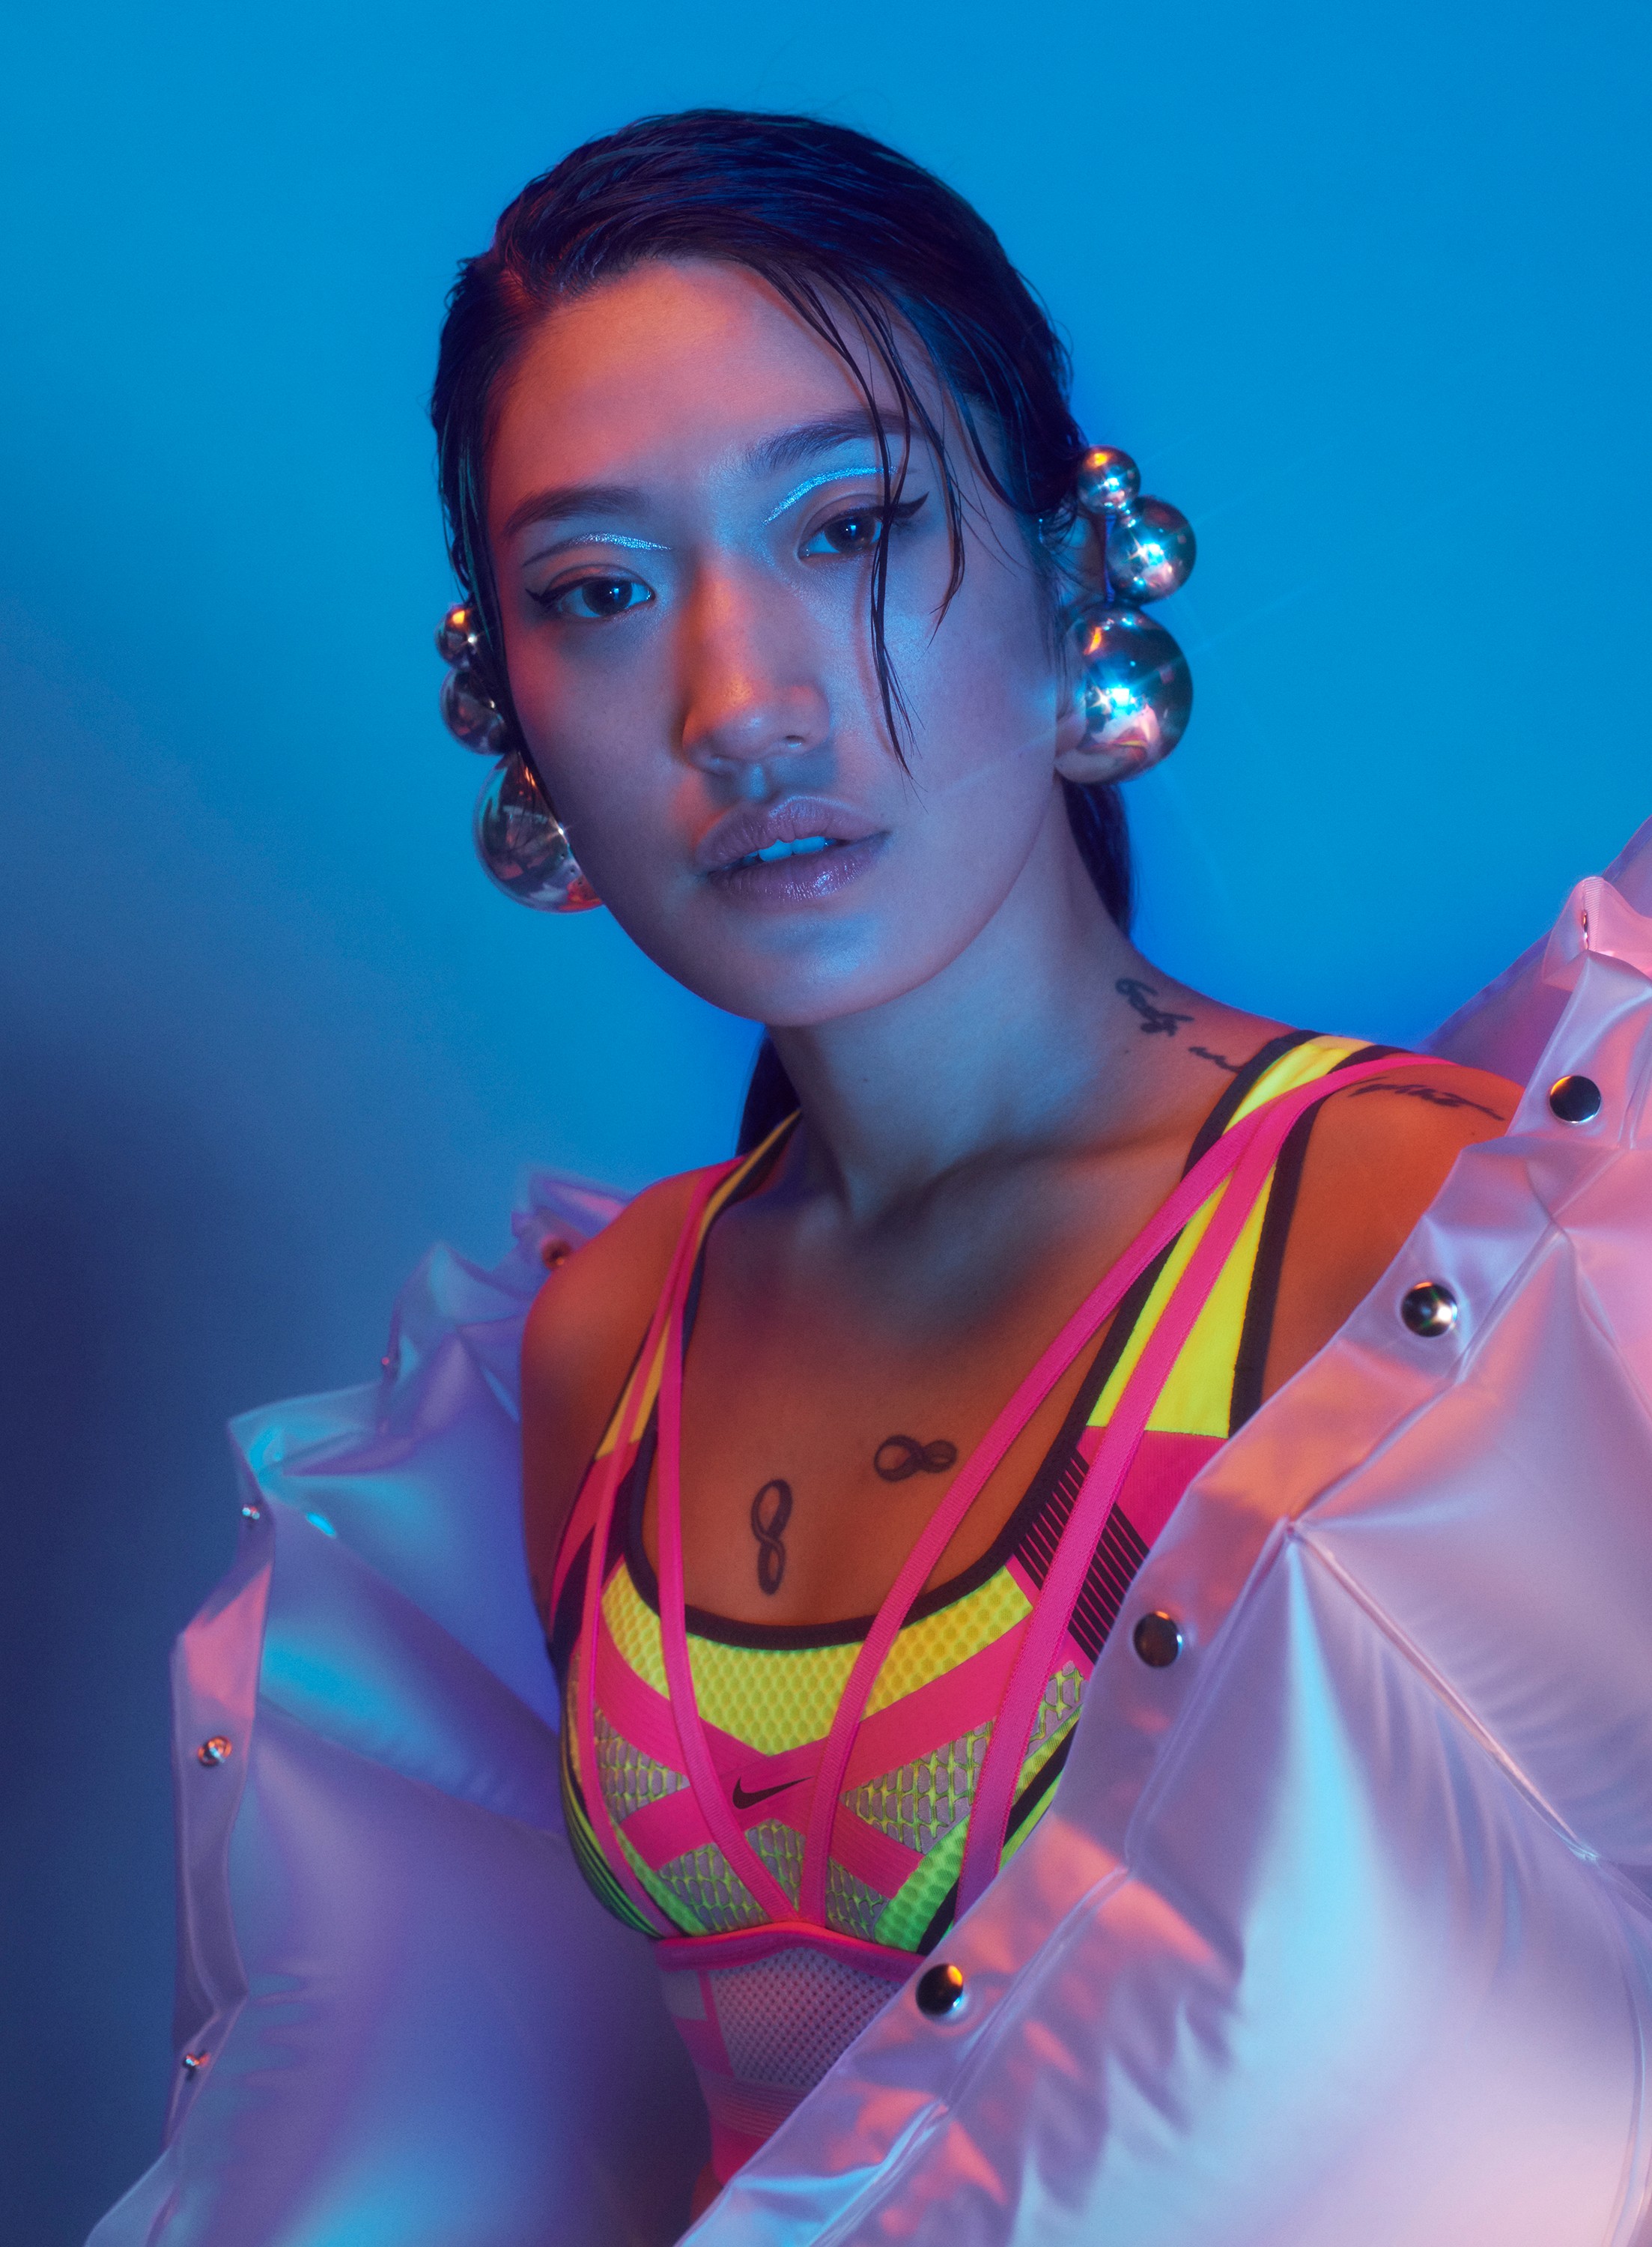 Peggy Gou - Thank you so much to everyone who joined me